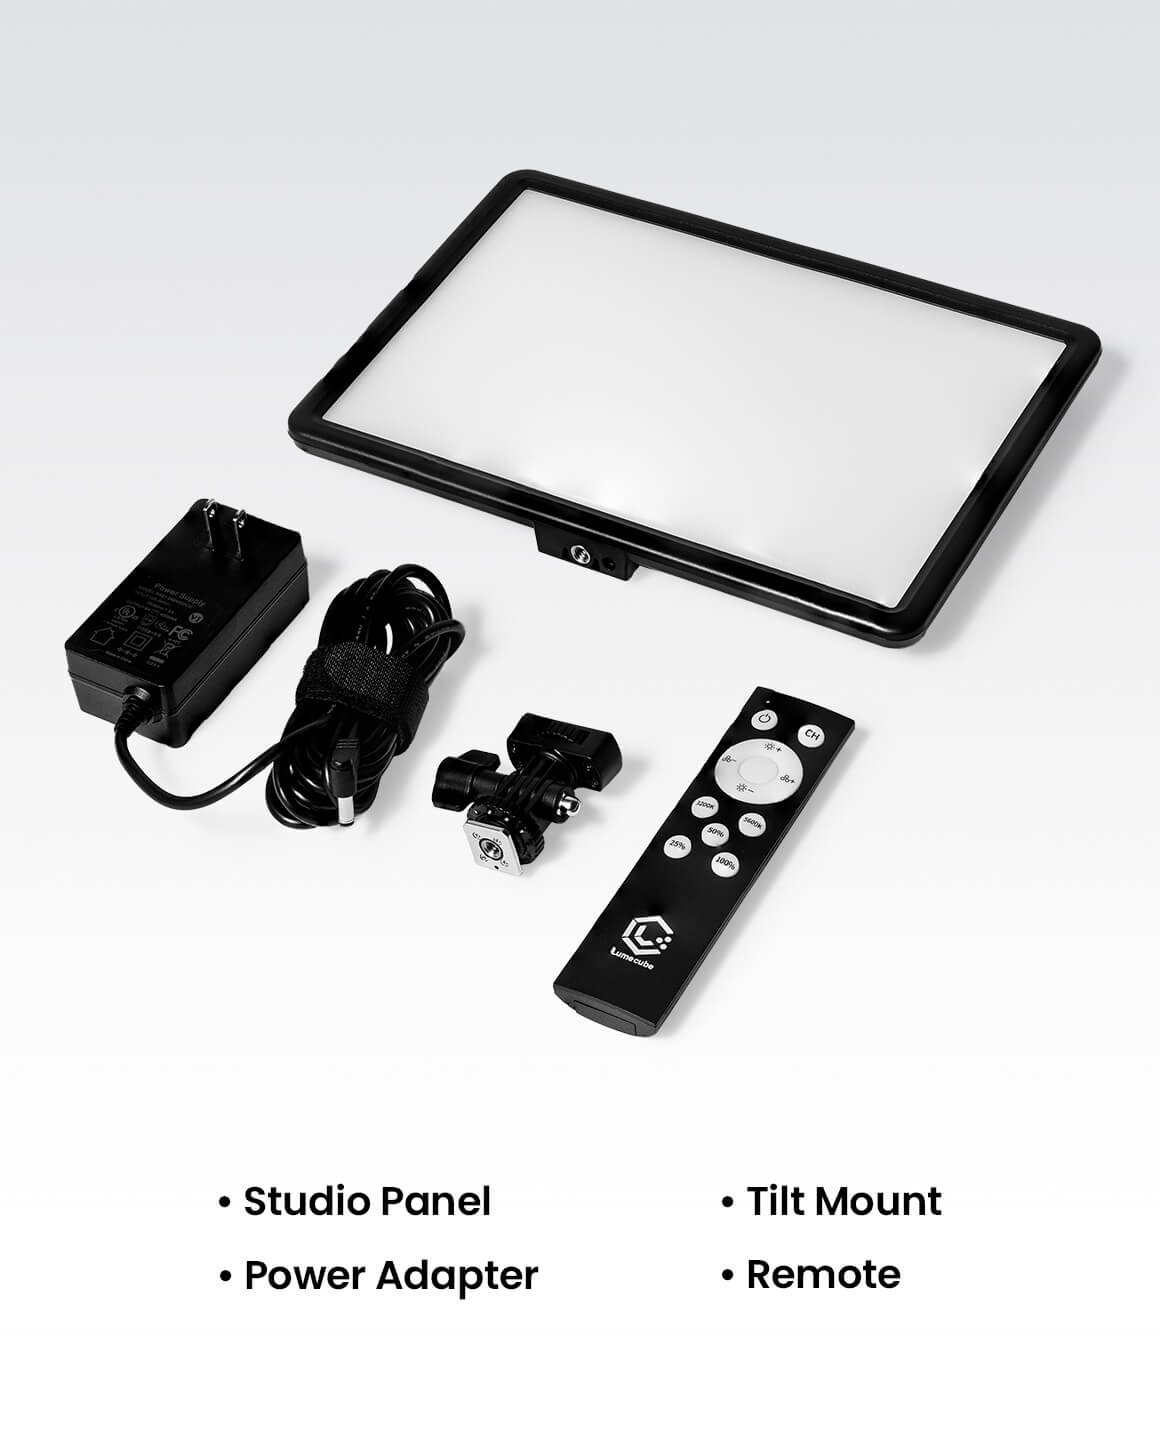 An array of accessories included with the Studio Panel